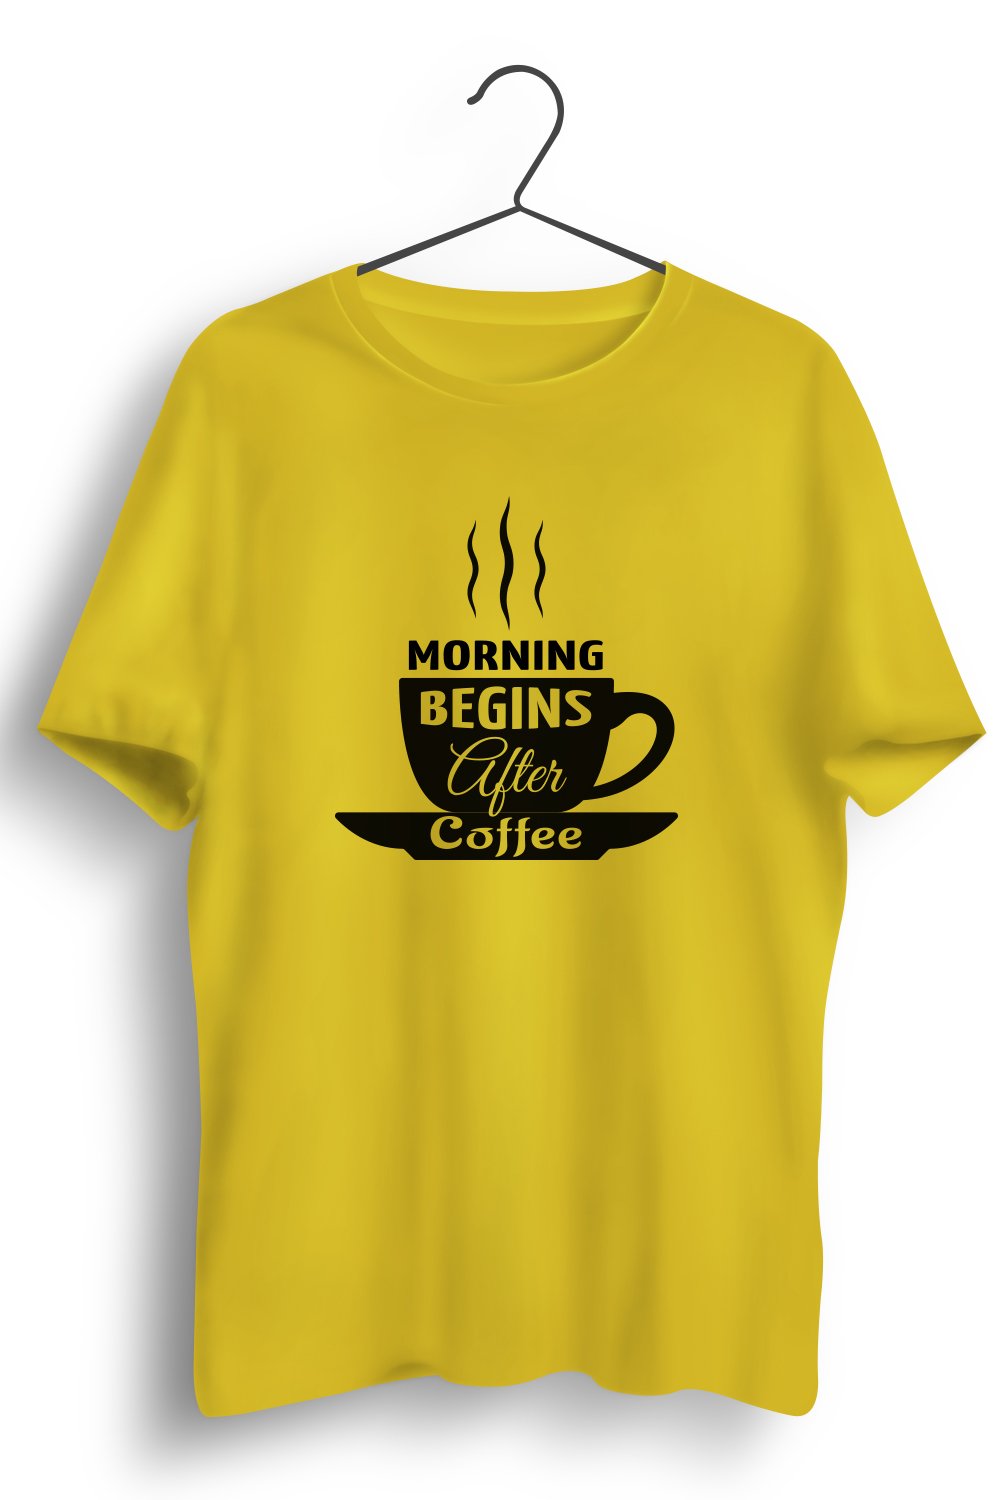 Morning Begins After Coffee Graphic Printed Yellow Tshirt